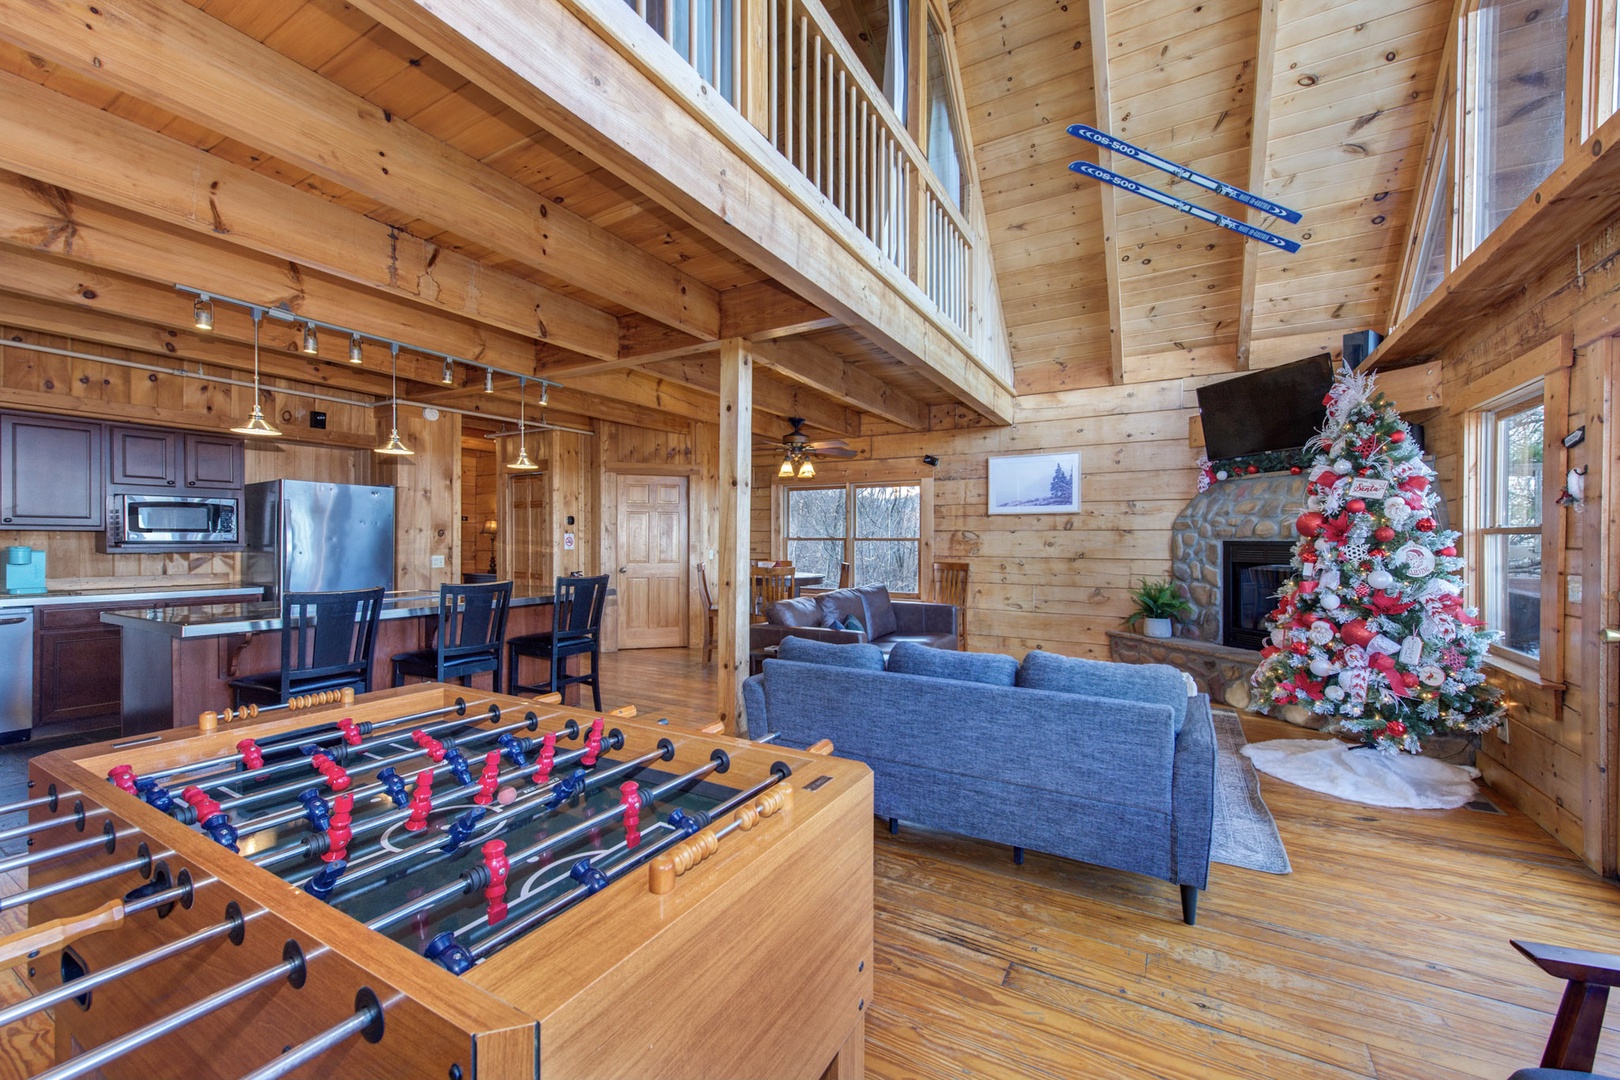 Go for the goal with a round of foosball in the living room!